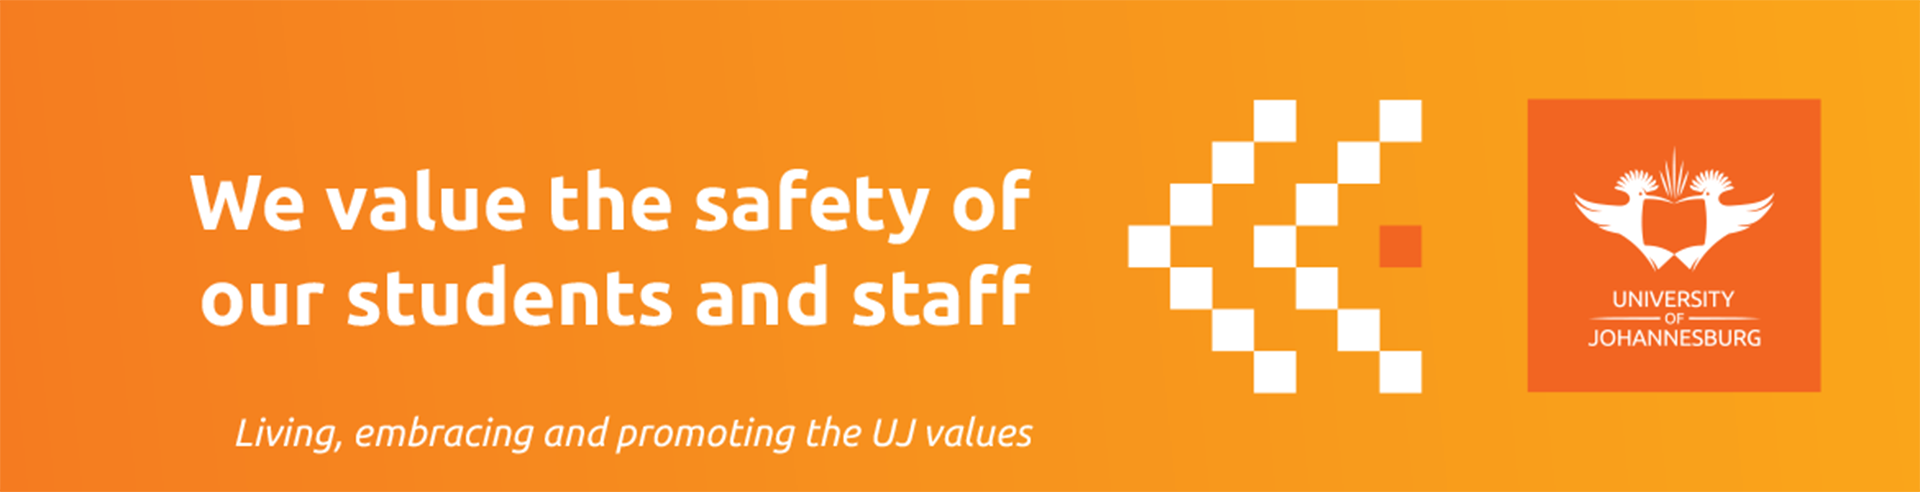 Uj Values Expressions Posters 2020 Ulink 1170x300mm 18